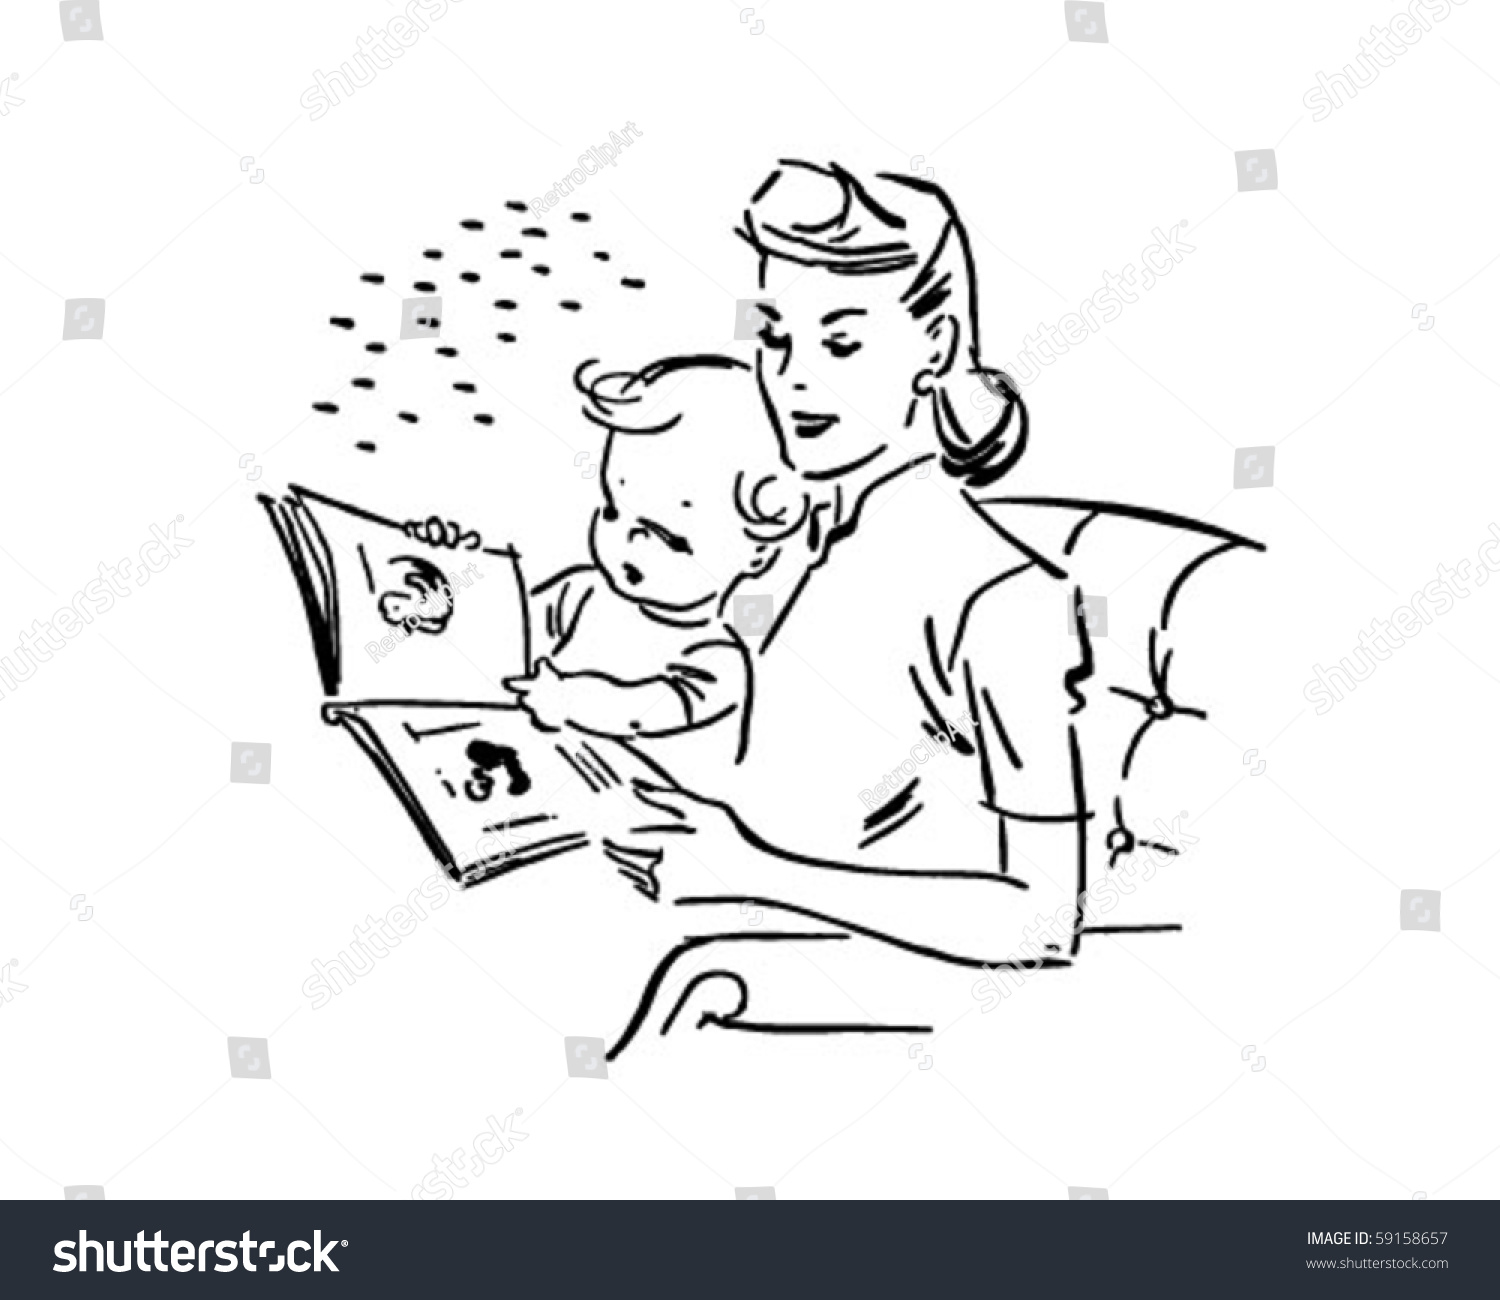 clip art mother reading to child - photo #28